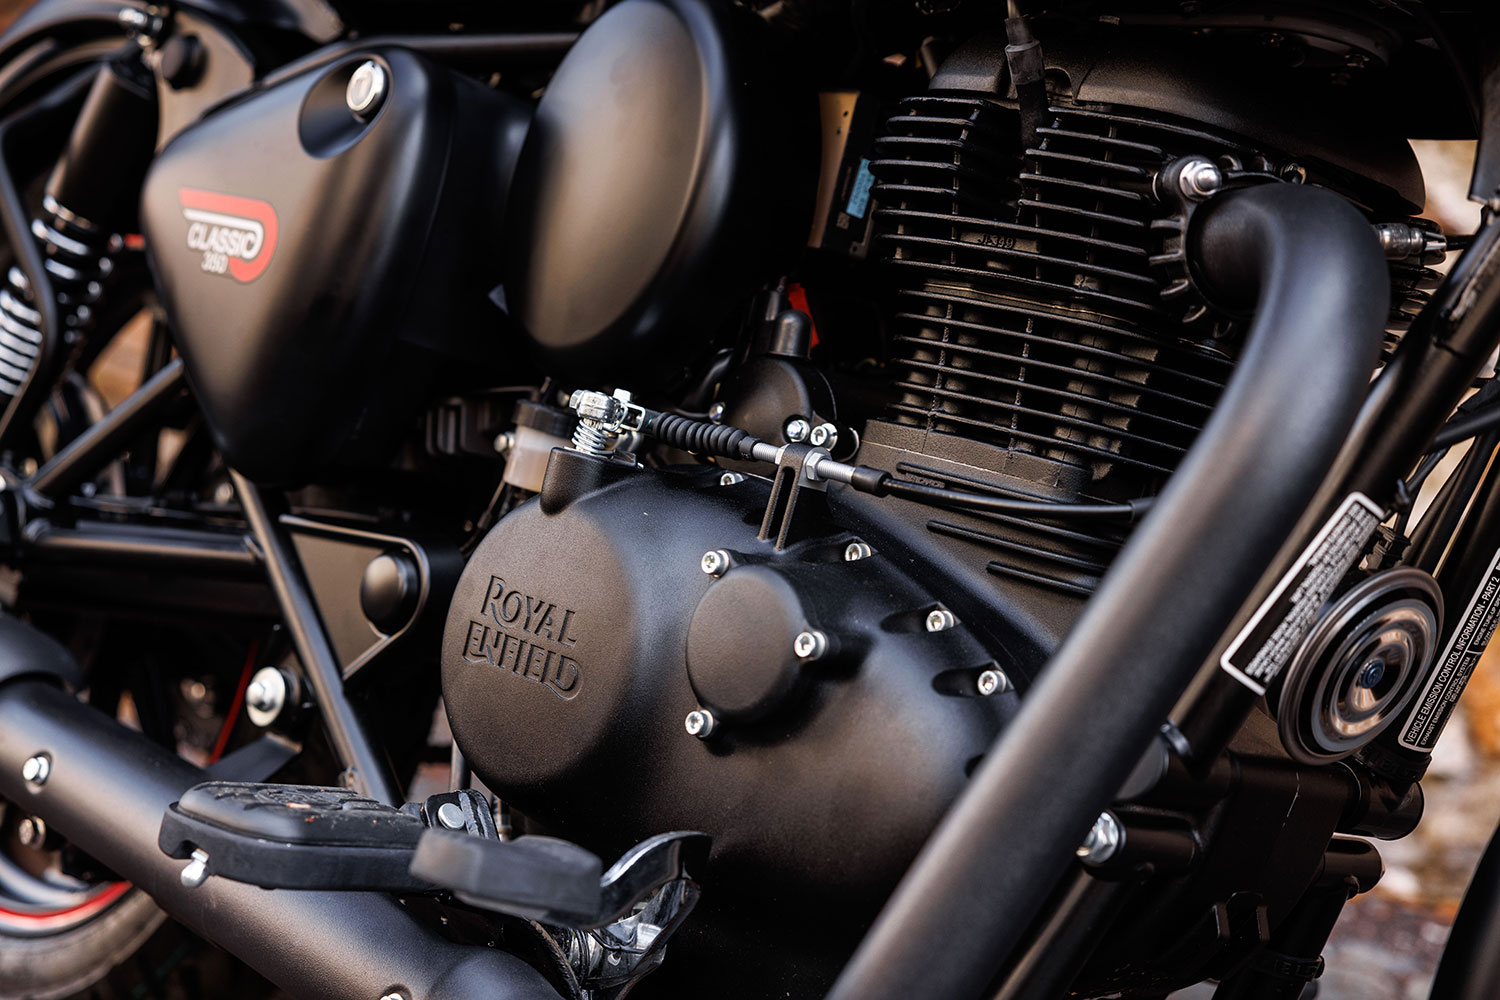 Royal Enfield Releases Accessories Catalog For Classic 350